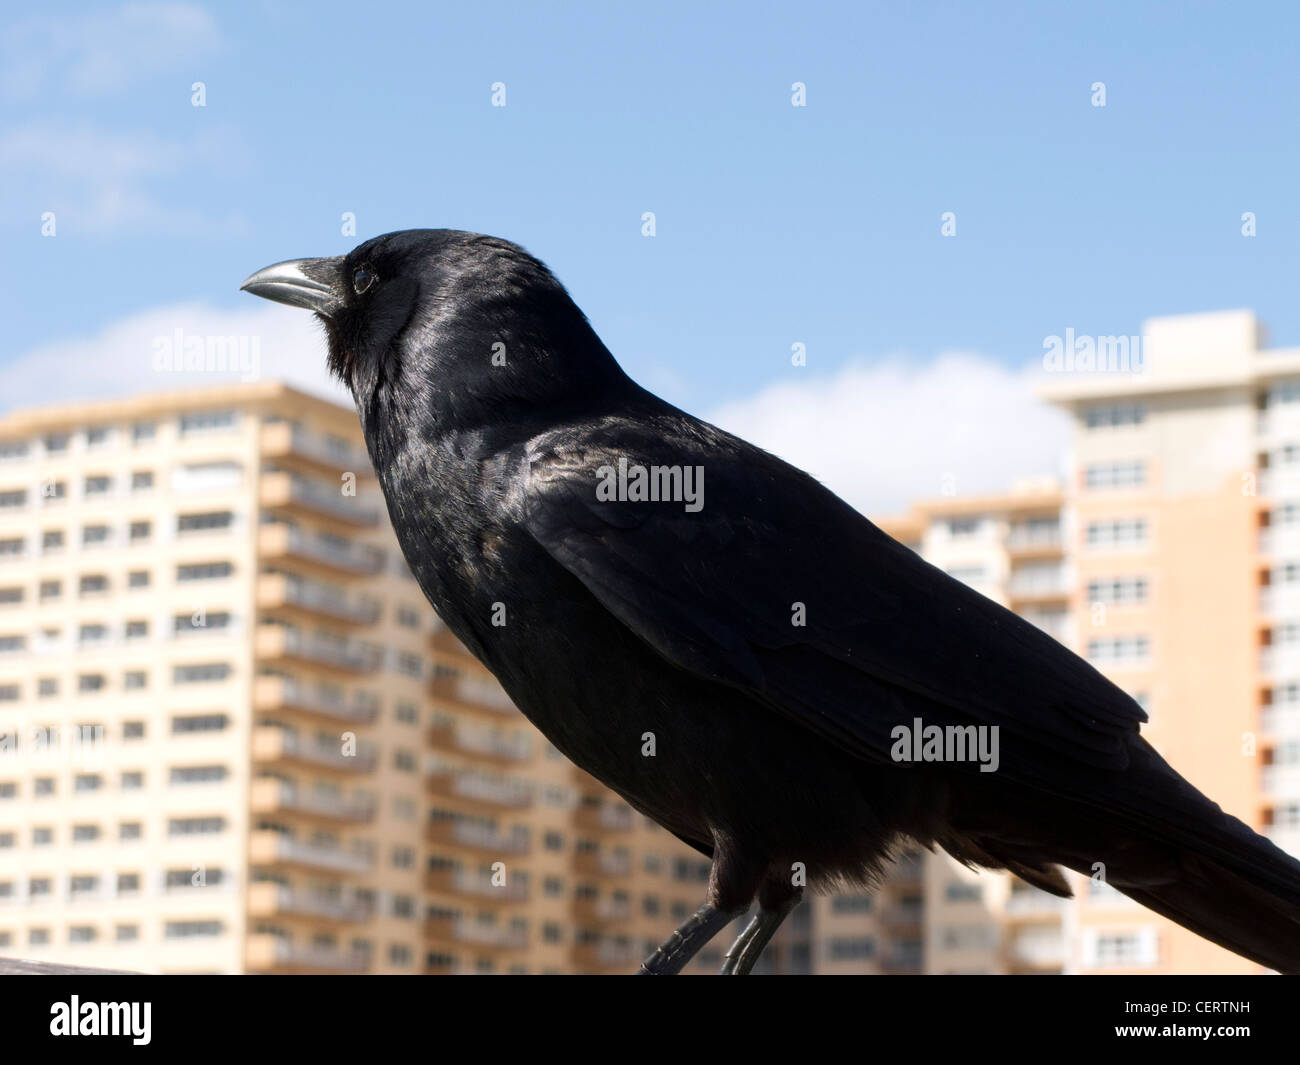 Crow in front of apartment buildings. Stock Photo